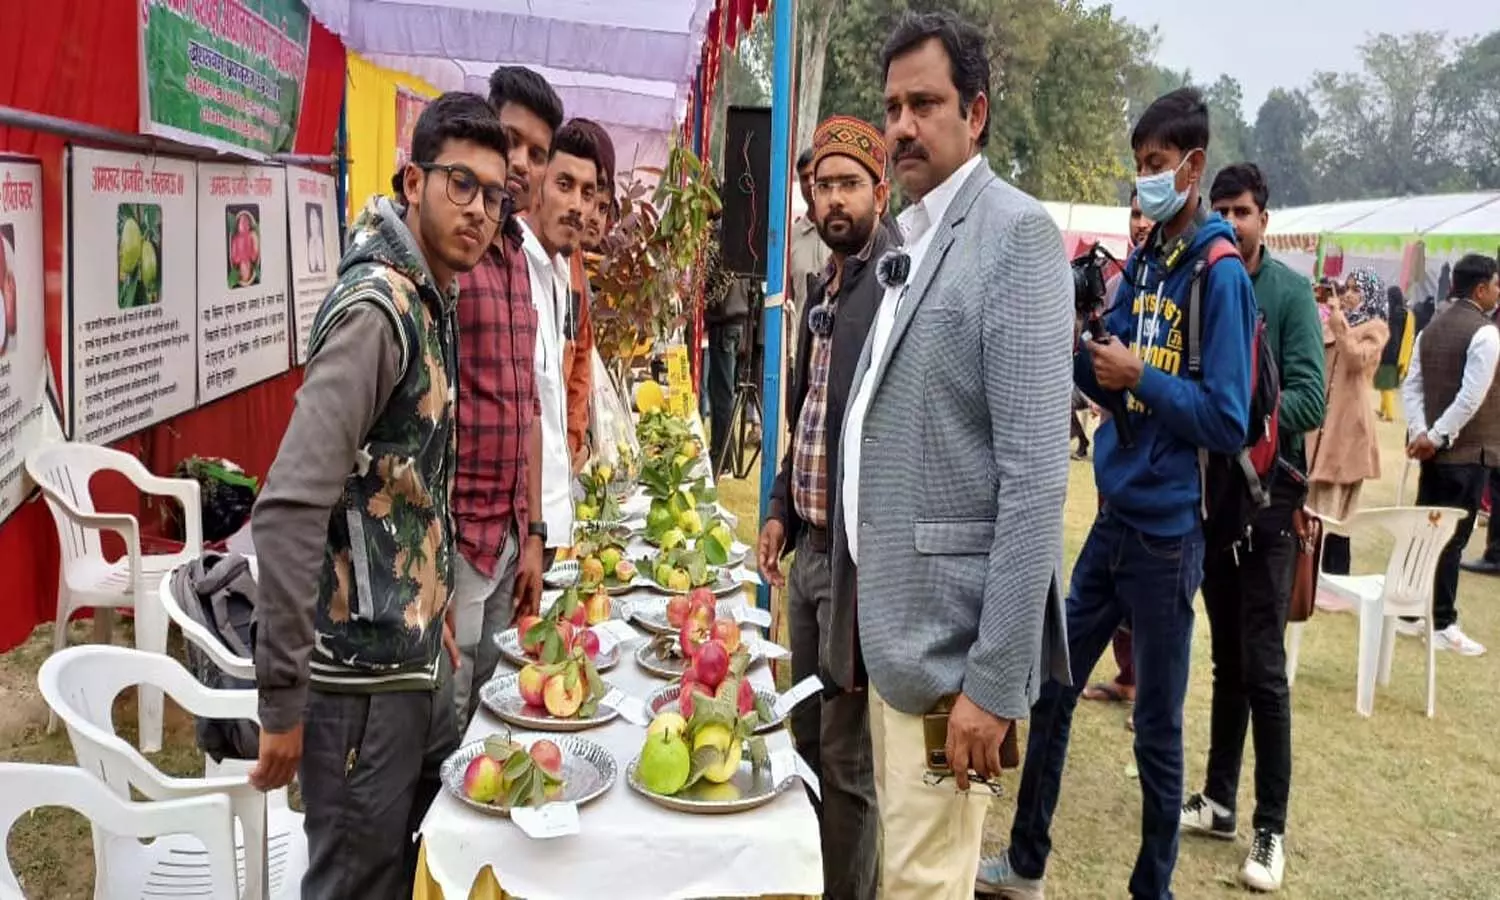 Guava festival held in Khusro Bagh of Prayagraj Guava of many species became the center of attraction